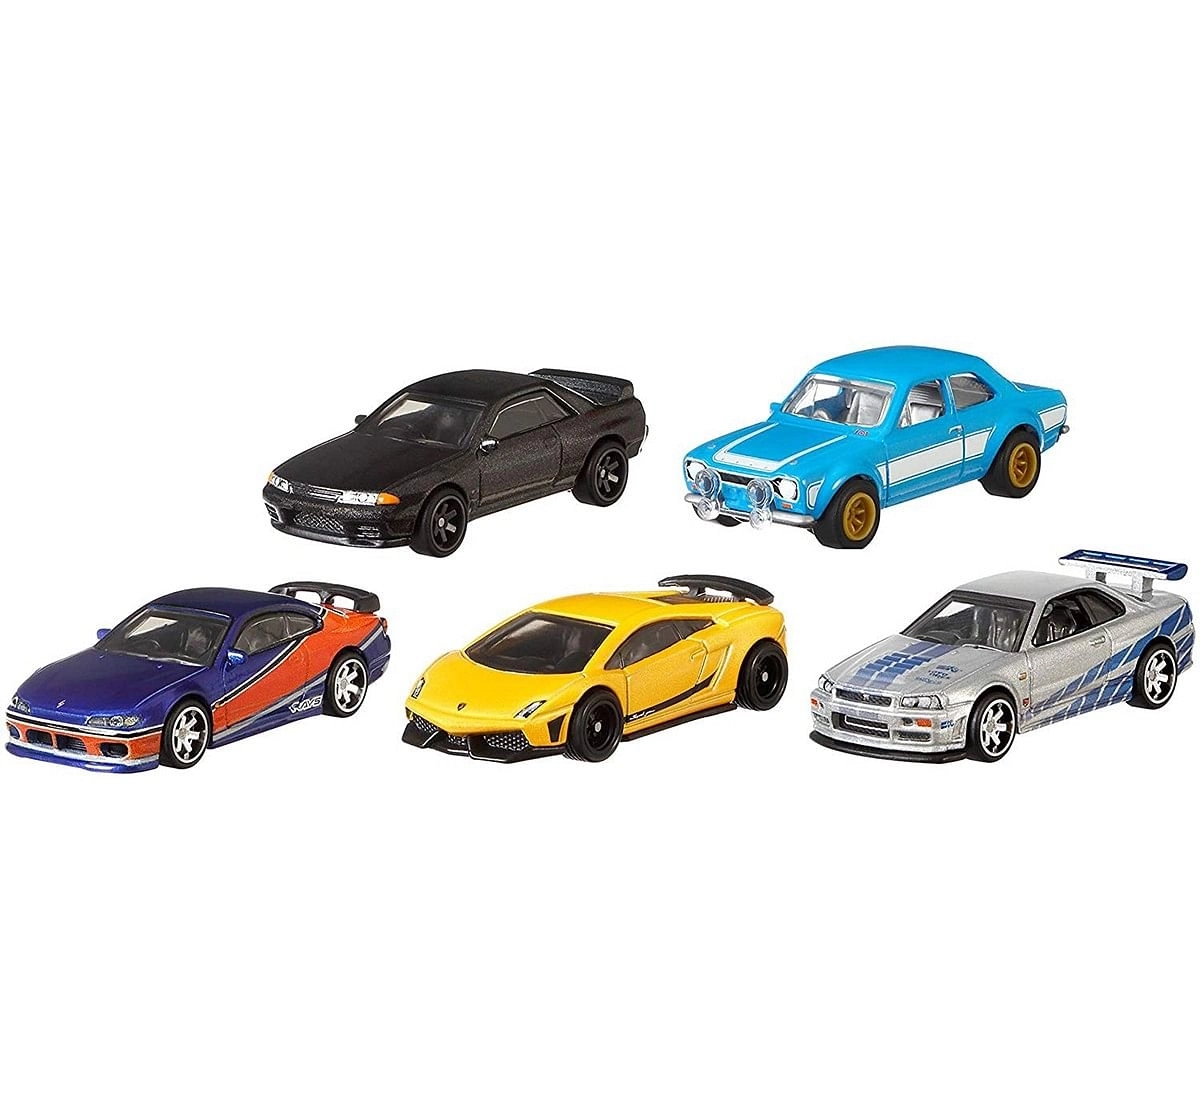 Hot Wheels 1:64 Fast Furious Premium Die Cast Car Tracksets & Train Sets for Kids age 12Y+, Assorted